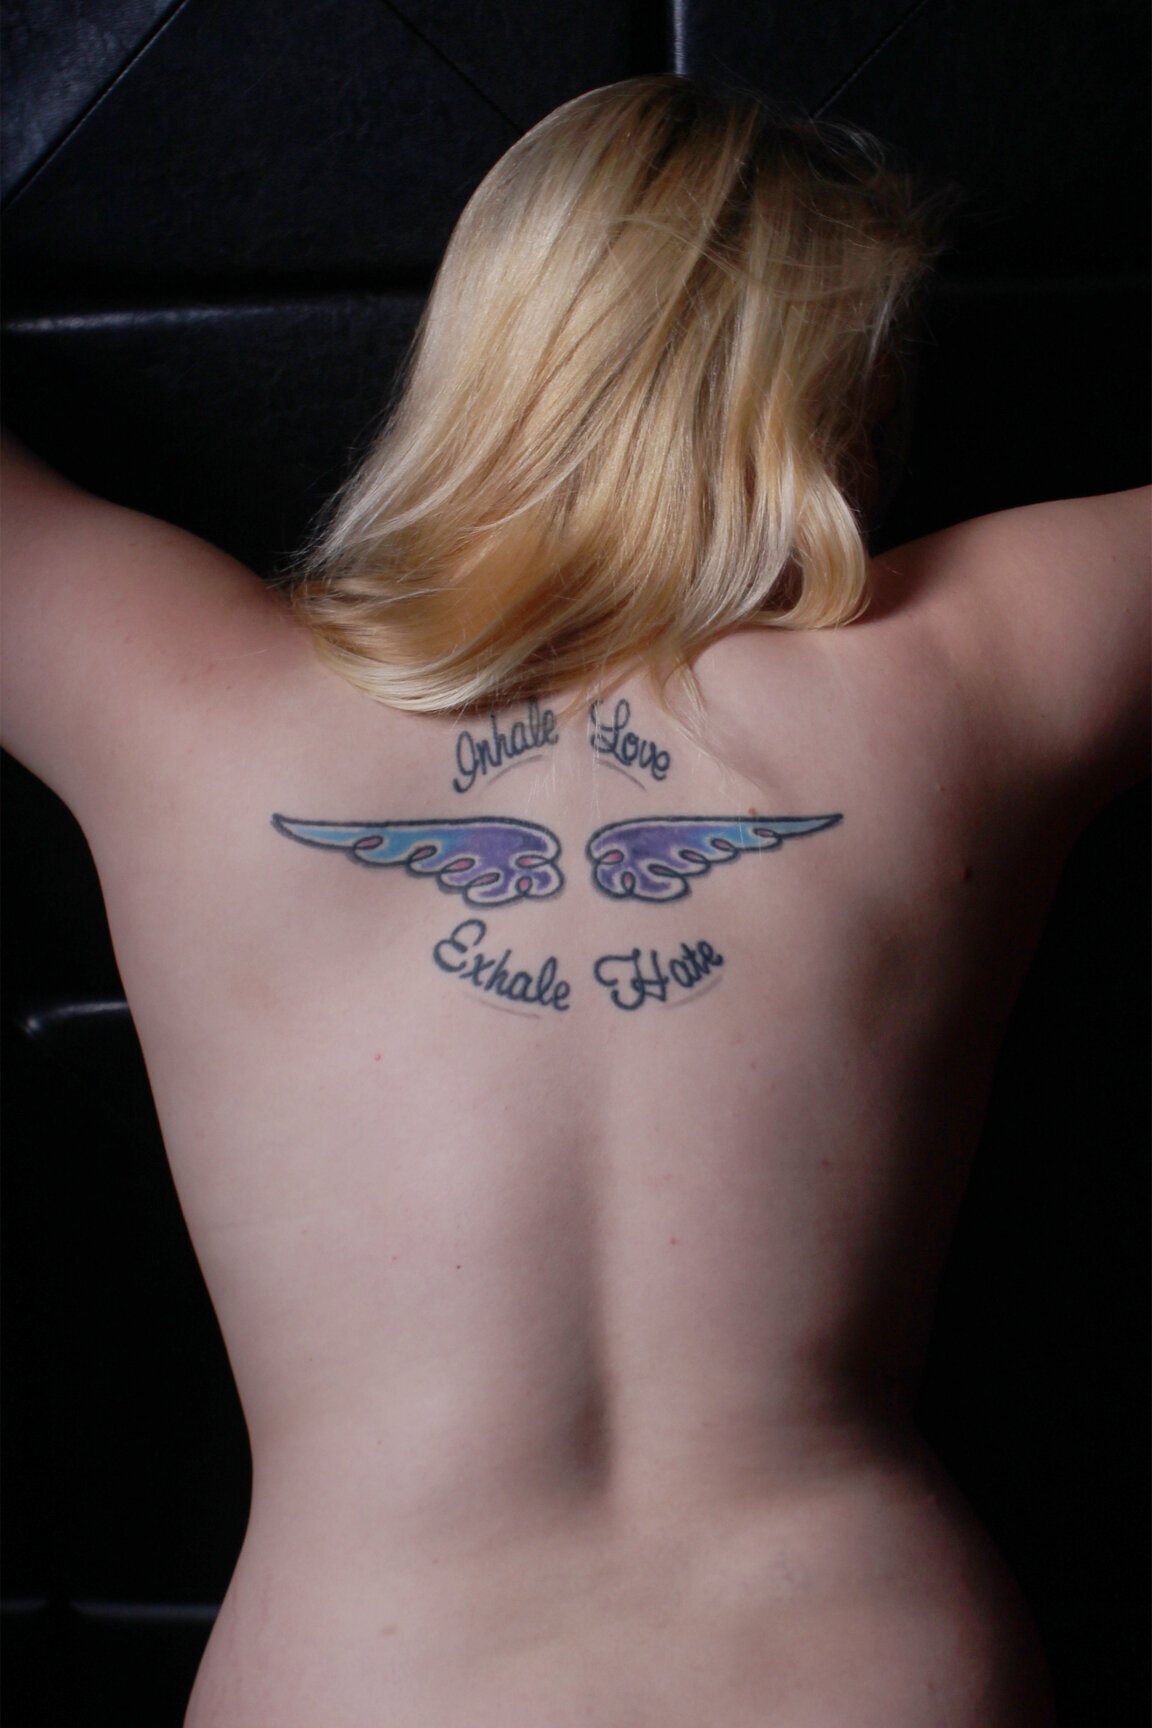 Tattoo, back, shoulders, wings, quote, nude, implied nude, blonde